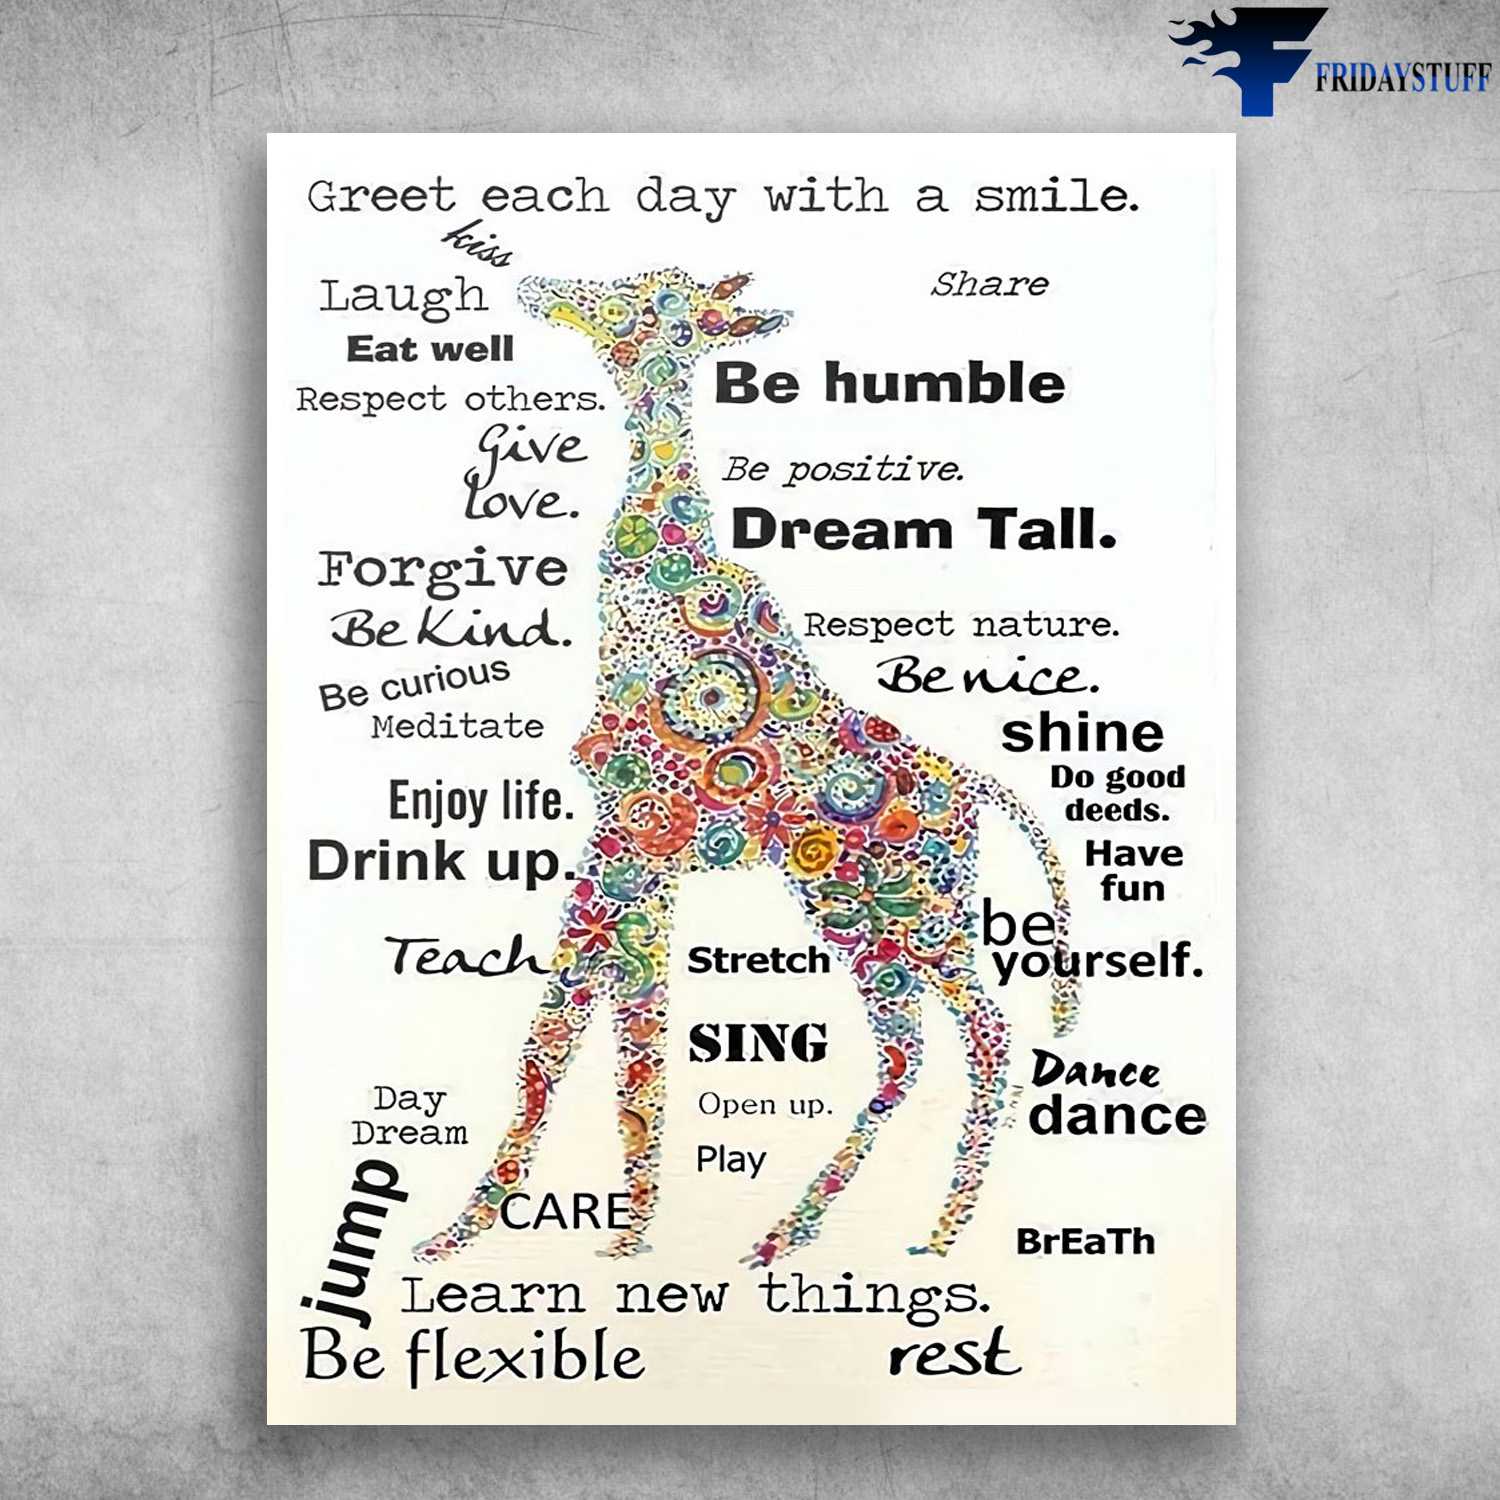 Giraffe Poster - Greet Each Day WithA Smile, Kiss, Share, Be Humble, Dream Tall Respect Nature, Be Nice